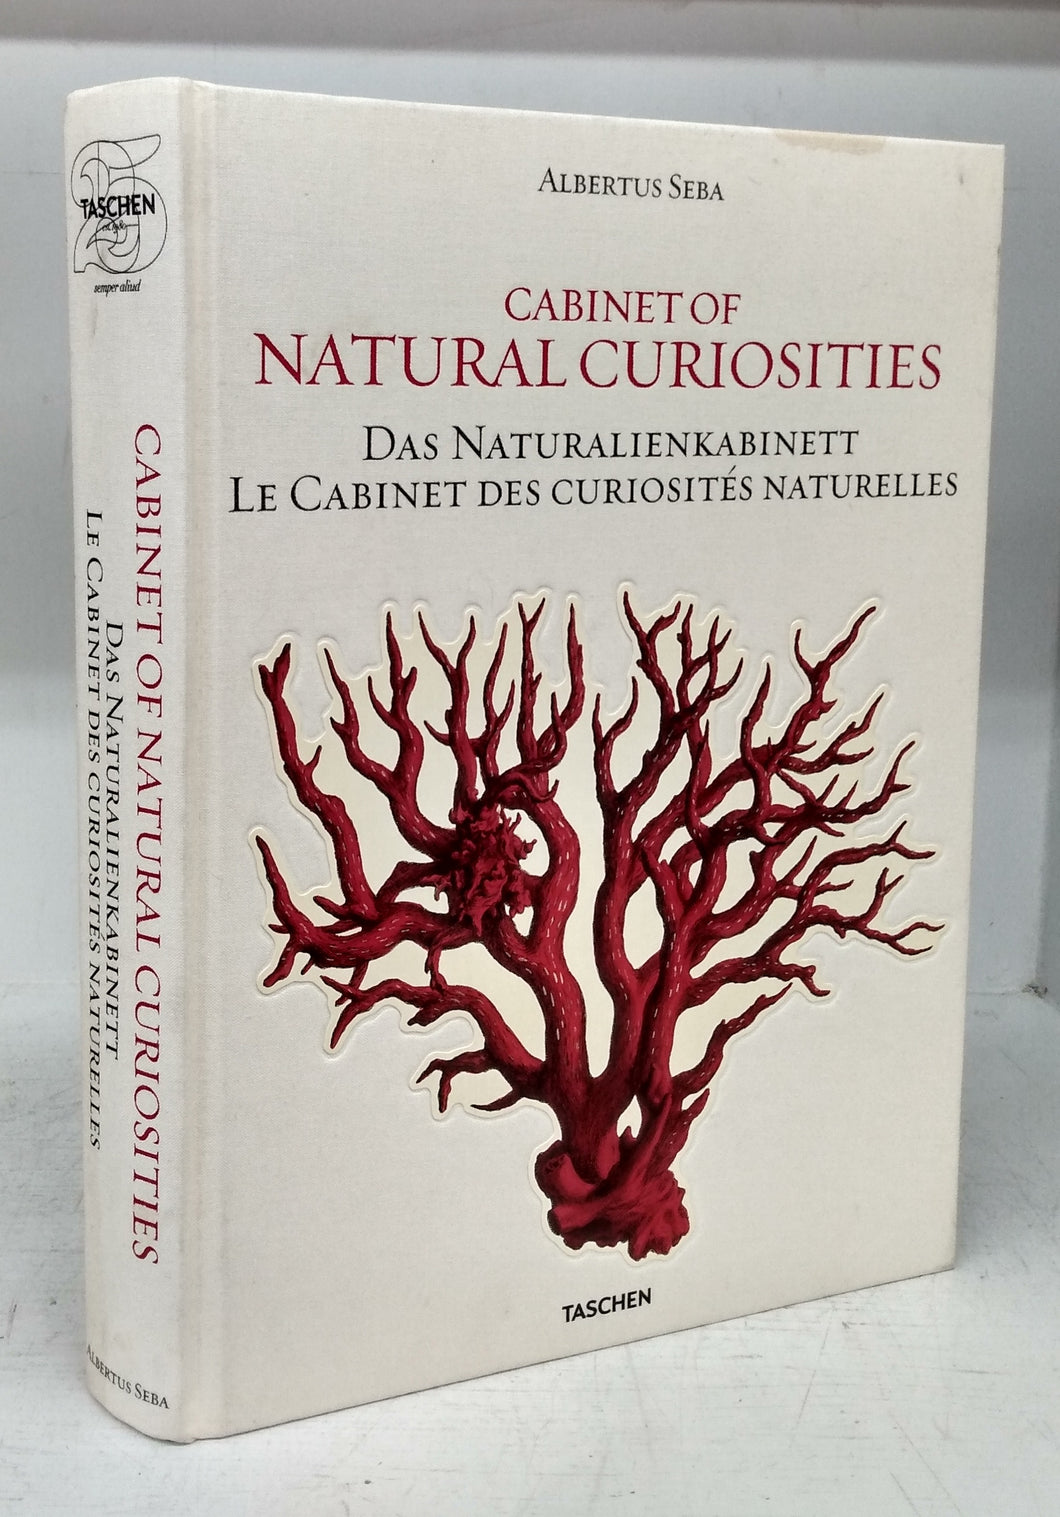 Cabinet of Natural Curiosities: The Complete Plates in Colour 1734-1765